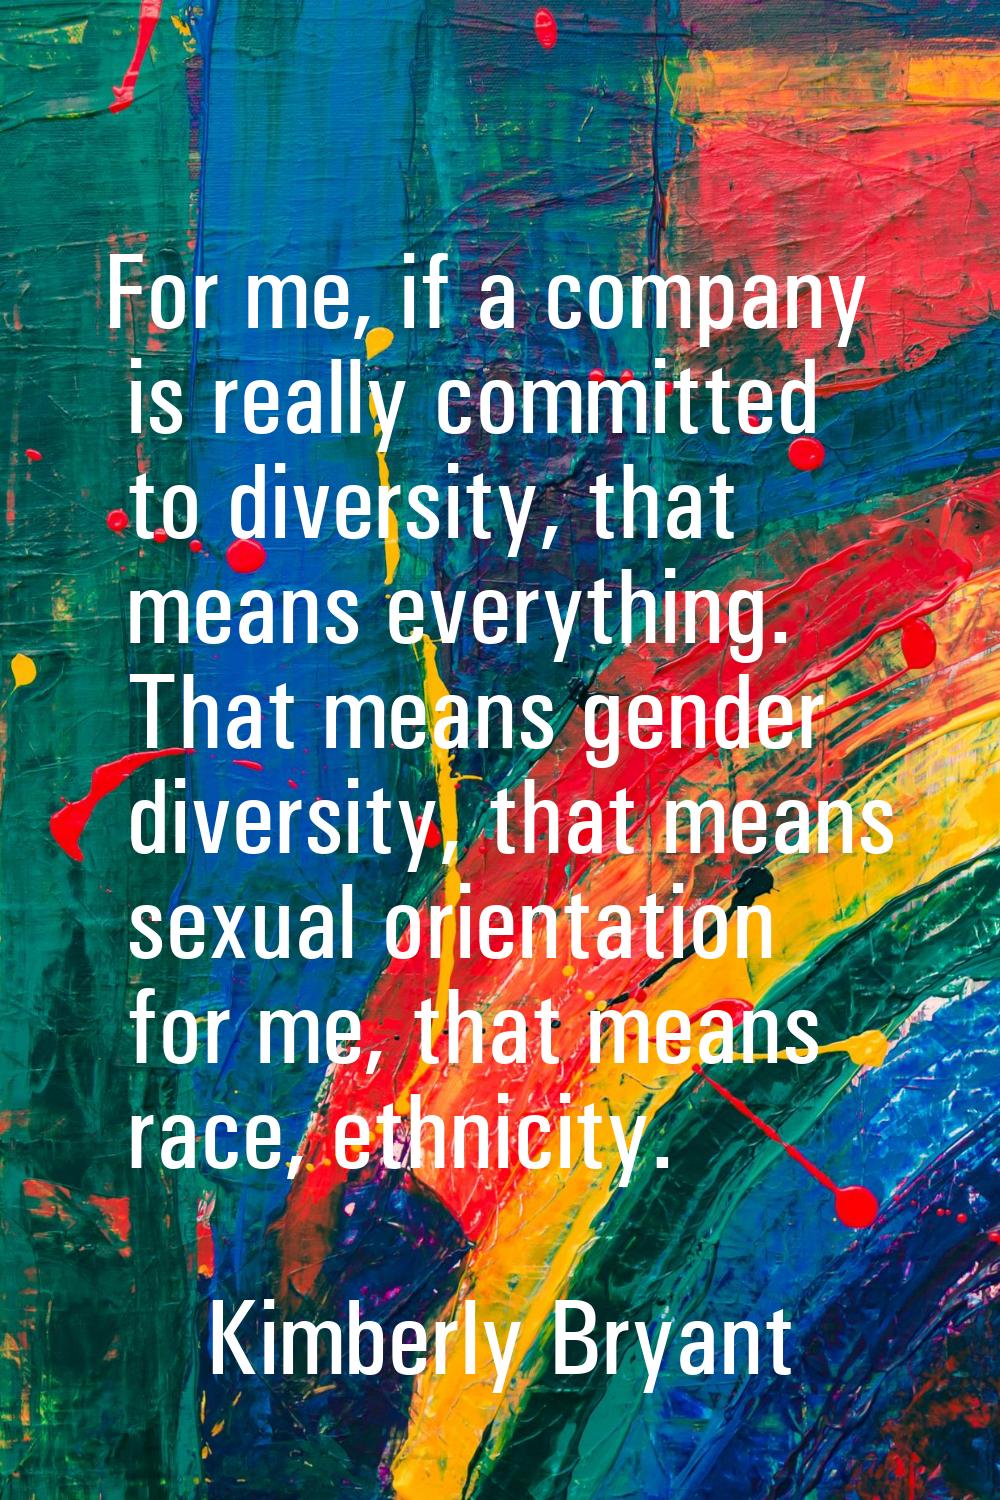 For me, if a company is really committed to diversity, that means everything. That means gender div